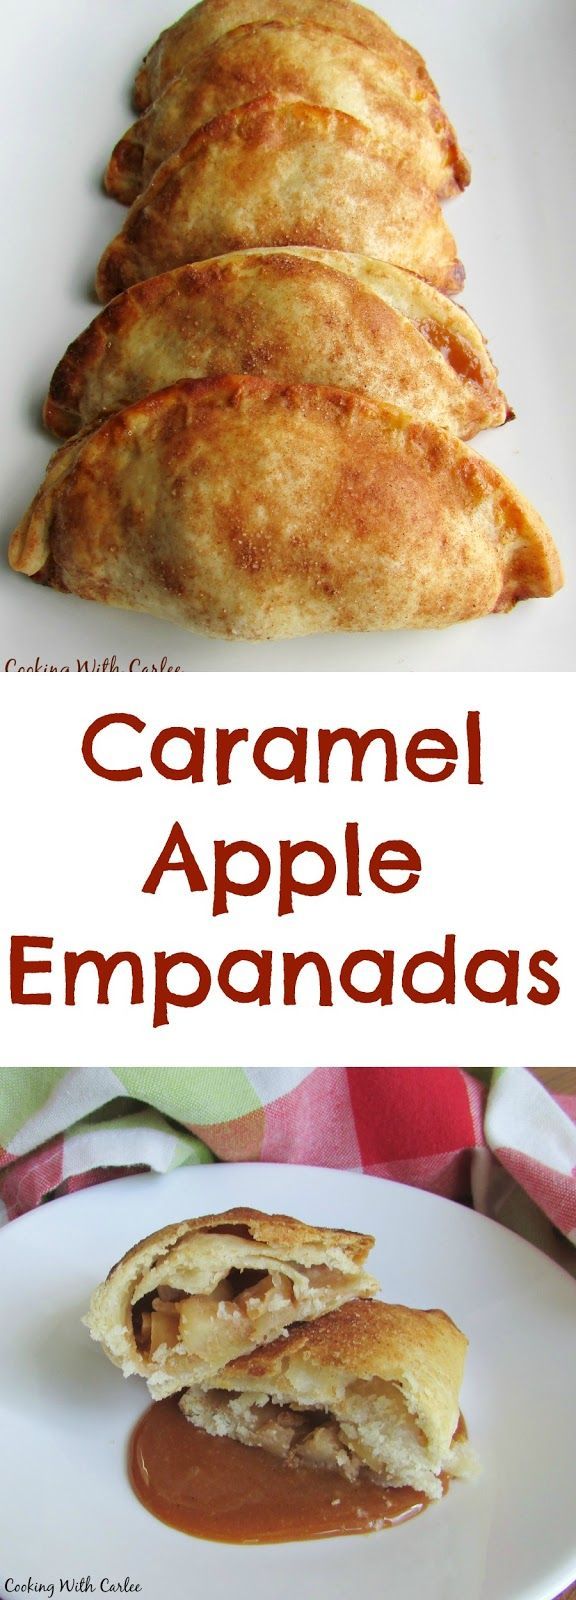 A warm flaky crust with a caramel apple filling is what dreams are made of! These caramel apple empanadas finger licking good! -   23 apple recipes vegan
 ideas